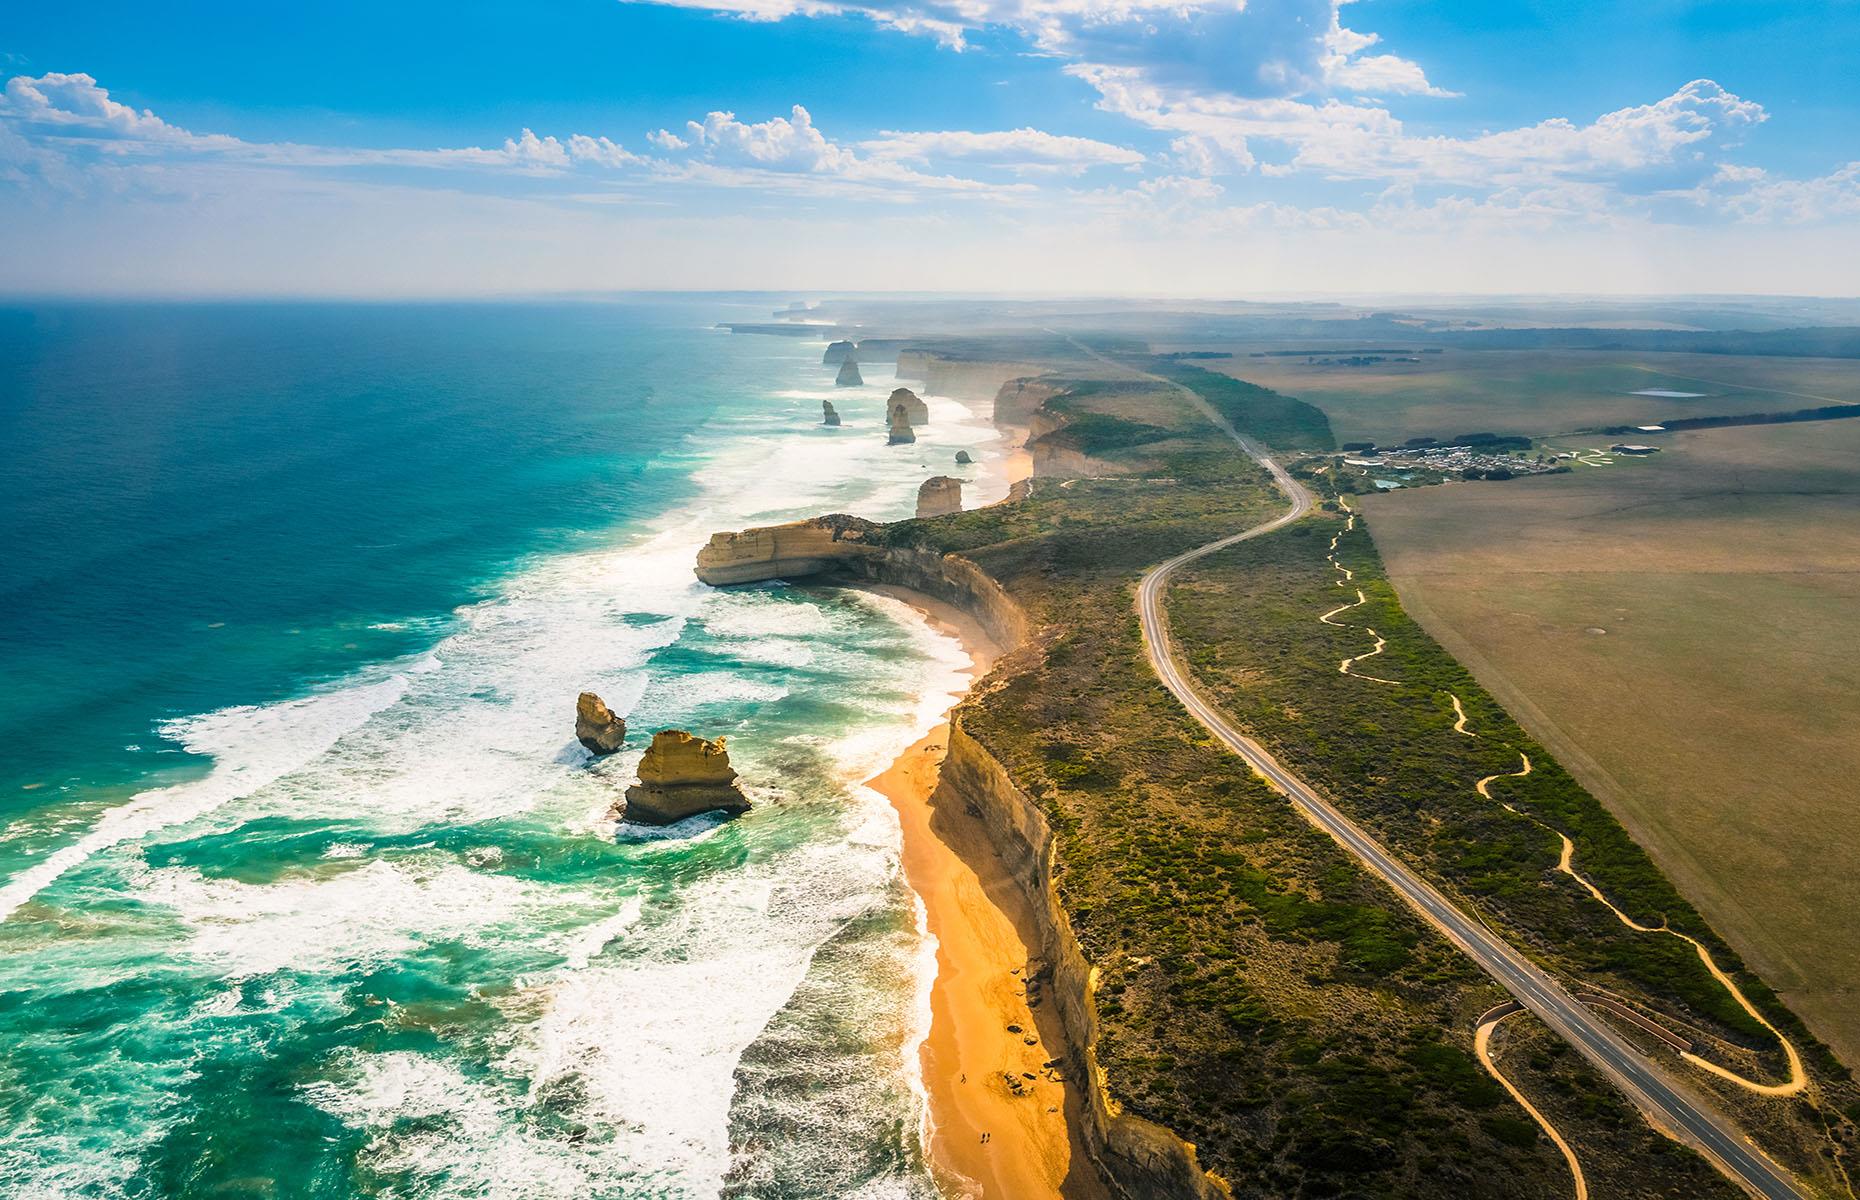 <p>Australia’s Great Ocean Road skirts along Victoria's coast to the border with South Australia, with jaw-dropping views at every stretch. Start in Torquay, Victoria to take the 148-mile route west that takes in golden arcs of secluded sand, verdant rainforest, and plunging cliffs.</p>  <p>The coastline's most famous rock formations can be seen in <a href="http://www.visitvictoria.com/regions/Great-Ocean-Road/Things-to-do/Nature-and-wildlife/National-parks-and-reserves/Port-Campbell-National-Park.aspx">Port Campbell National Park</a>, towards the end of the route, including the Twelve Apostles. Although sadly erosion has seen to it that only eight of these magnificent rocks remain.</p>